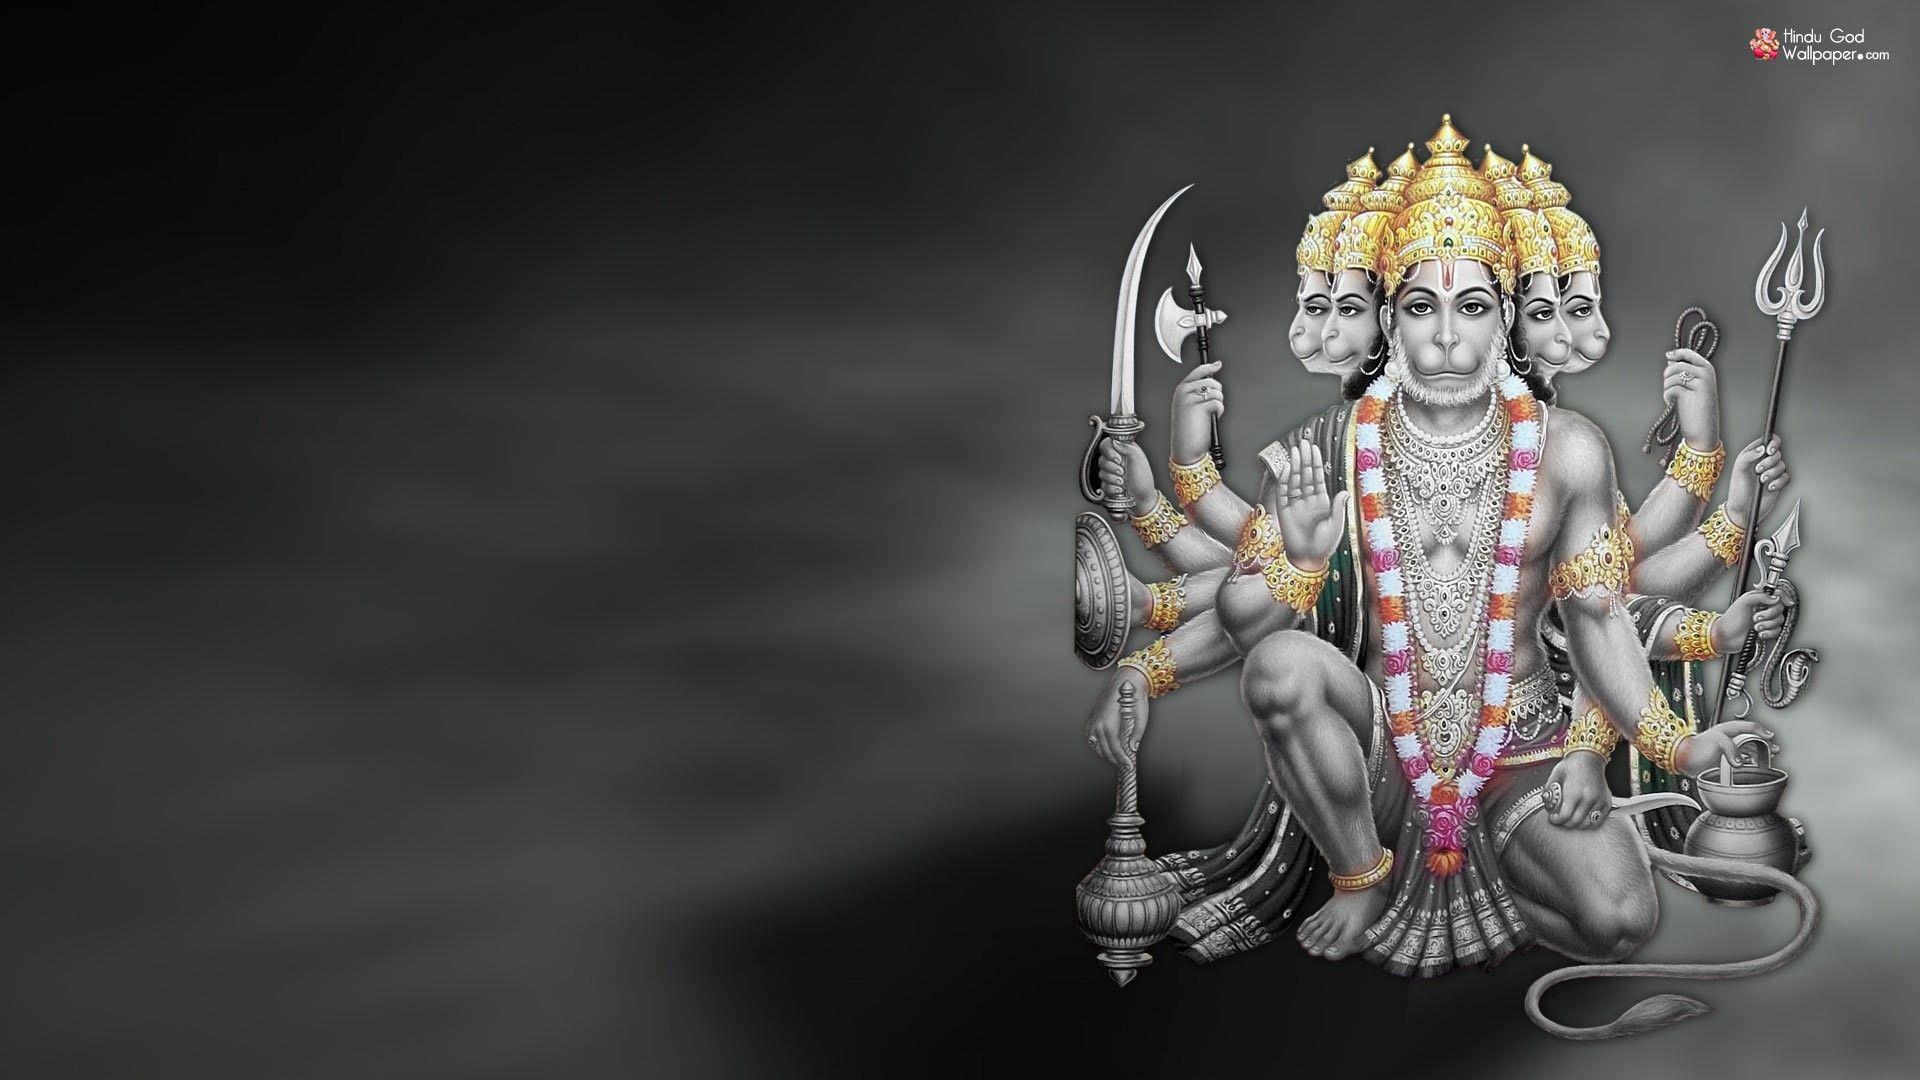 Amoled Hindu God Cave iPhone Wallpapers Free Download